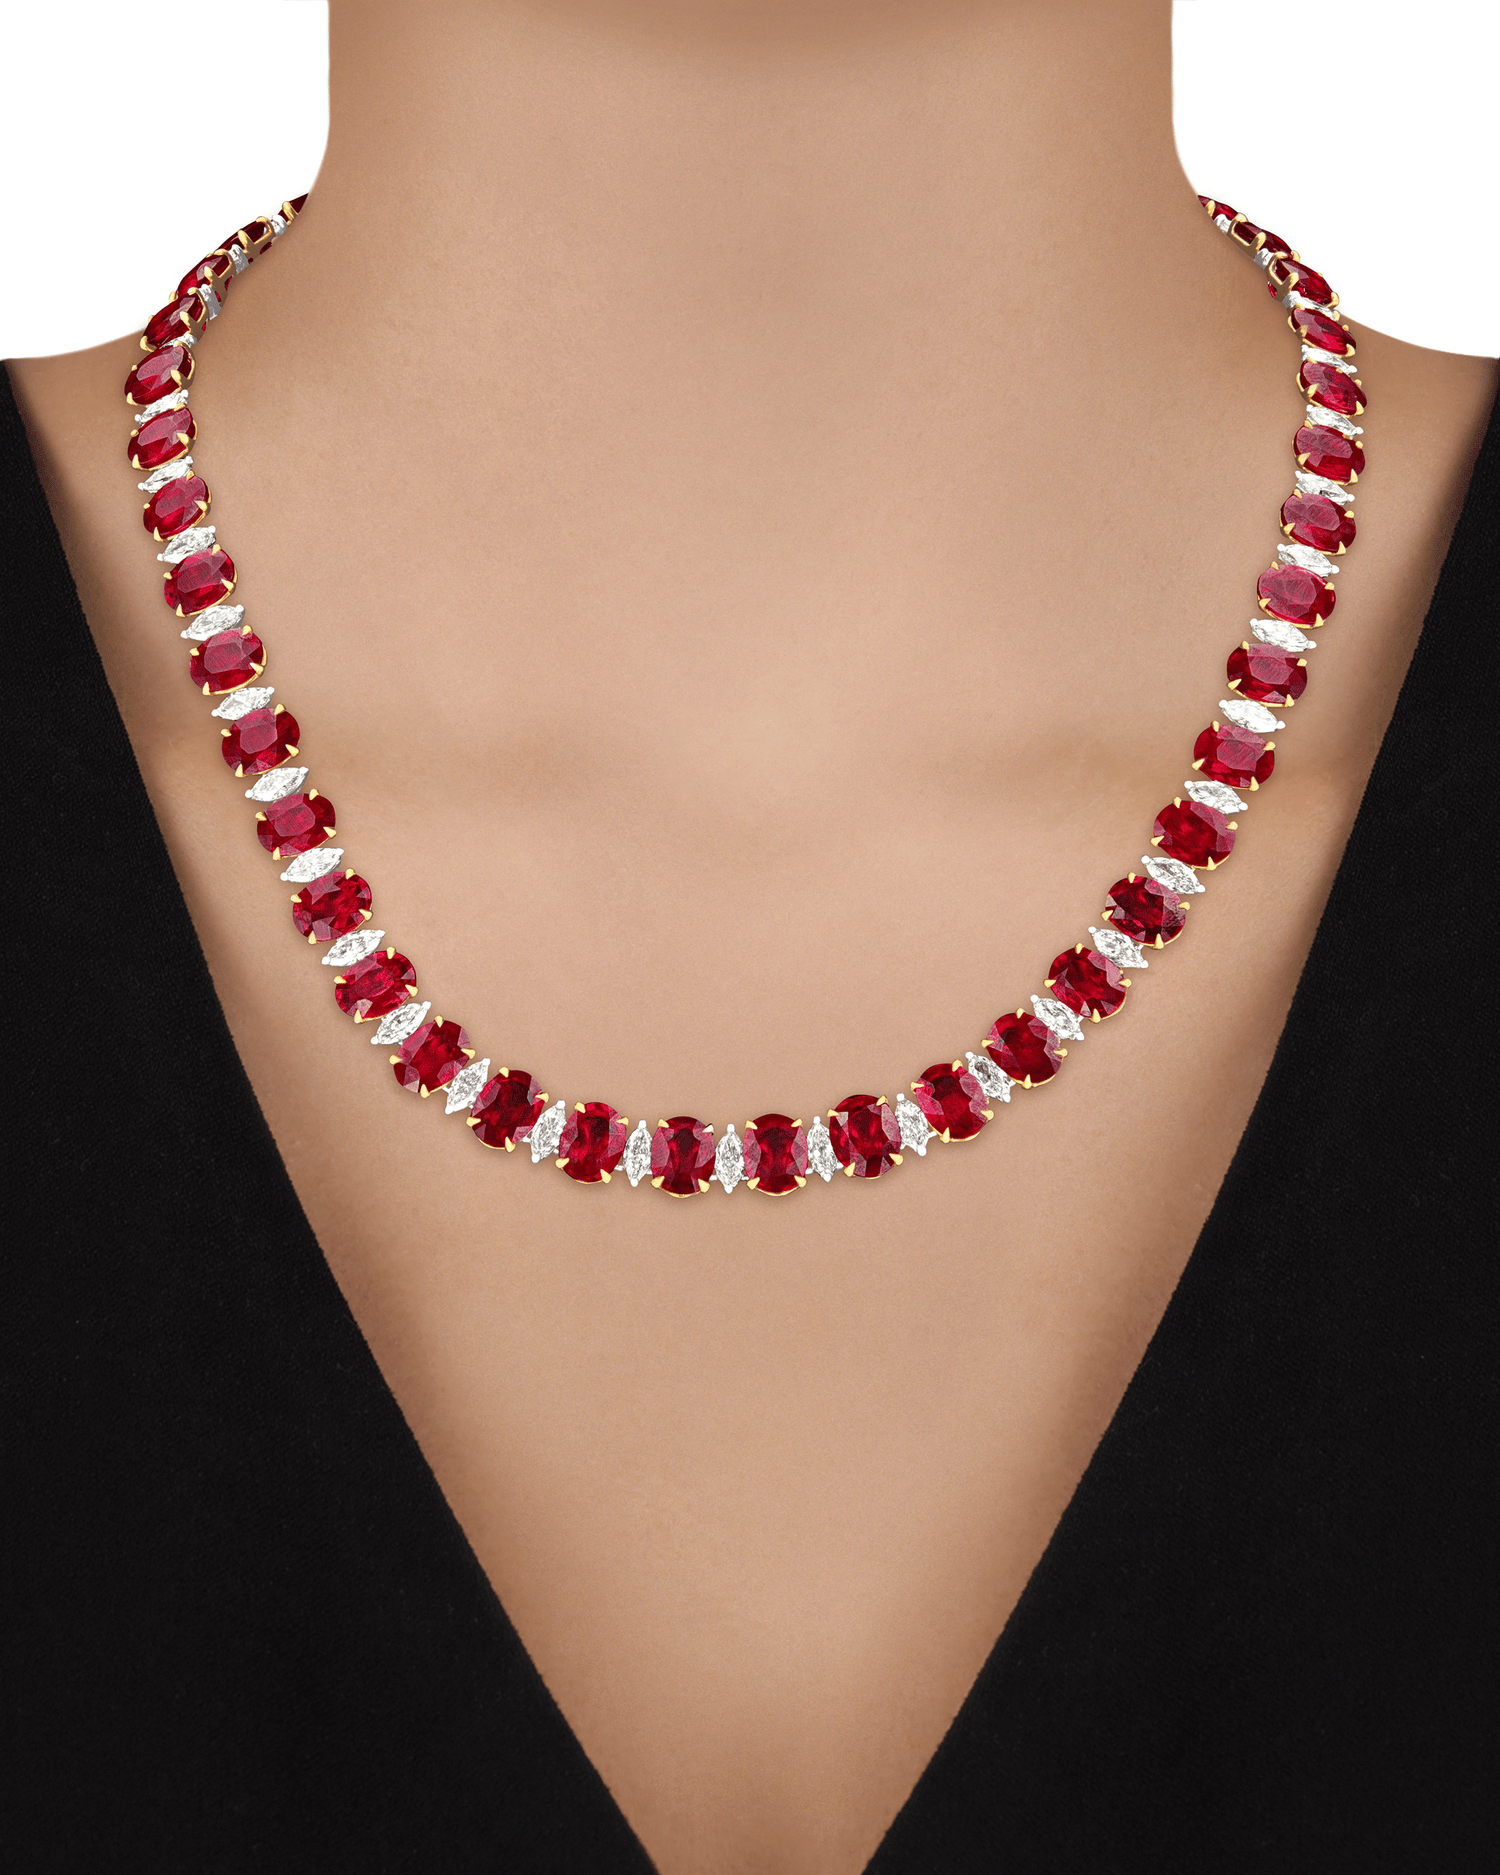 Salavetti Ruby Necklace, 57.99 Carats